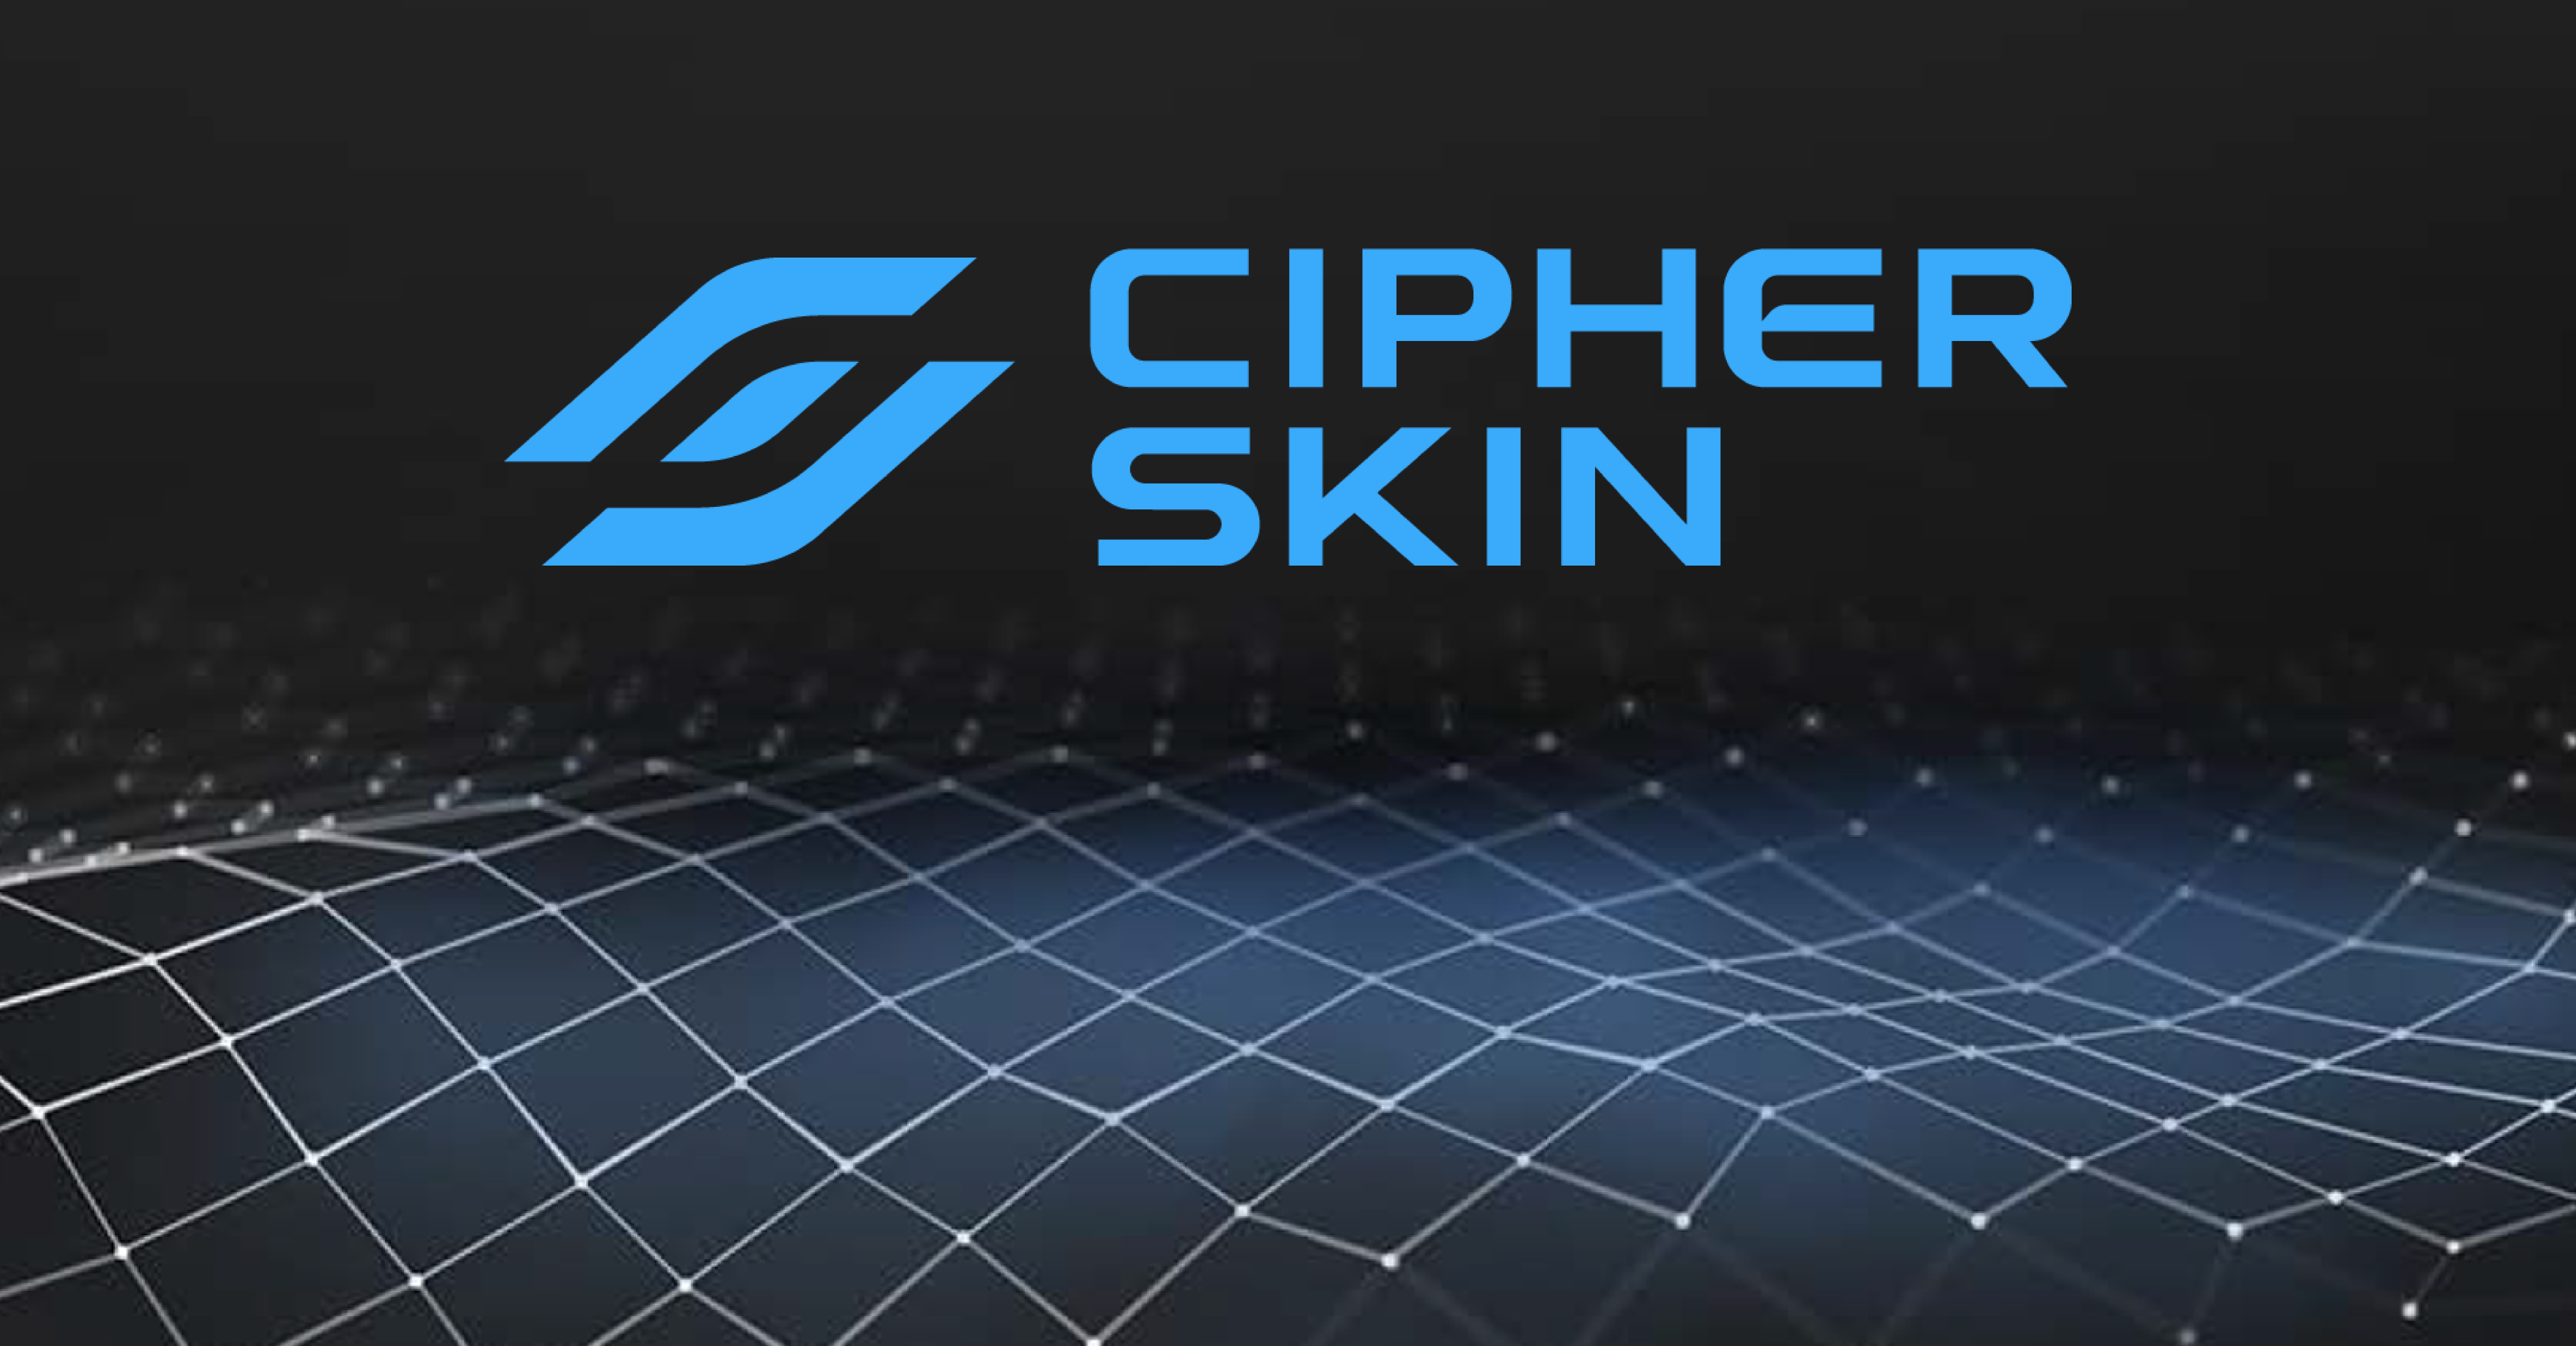 Cipher Skin on X: It's soccer season! Here's a sneak peak of the Cipher  Skin Smart Leggings, featuring the most advanced computerized clothing  technology. We're excited to see this complete lower-body player